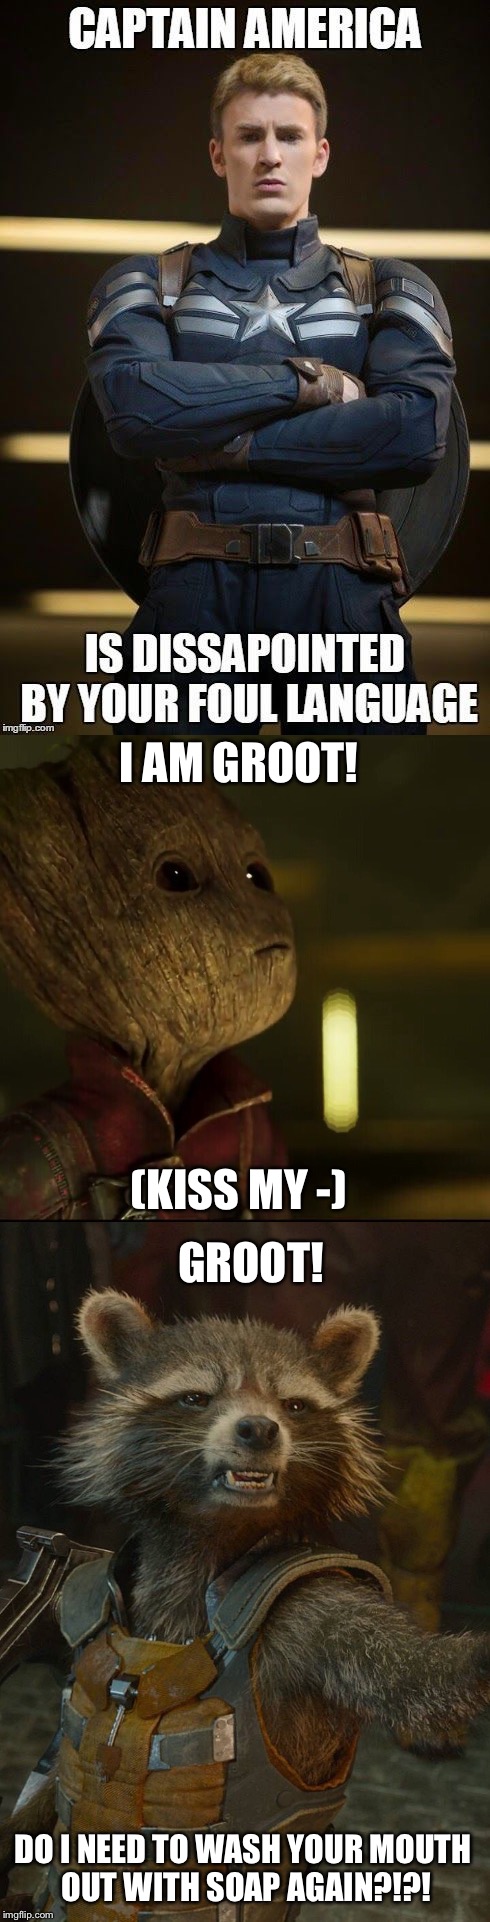 Groot has a Potty Mouth | I AM GROOT! (KISS MY -); GROOT! DO I NEED TO WASH YOUR MOUTH OUT WITH SOAP AGAIN?!?! | image tagged in groot,rocket raccoon,captain america,language,gotg2,memes | made w/ Imgflip meme maker